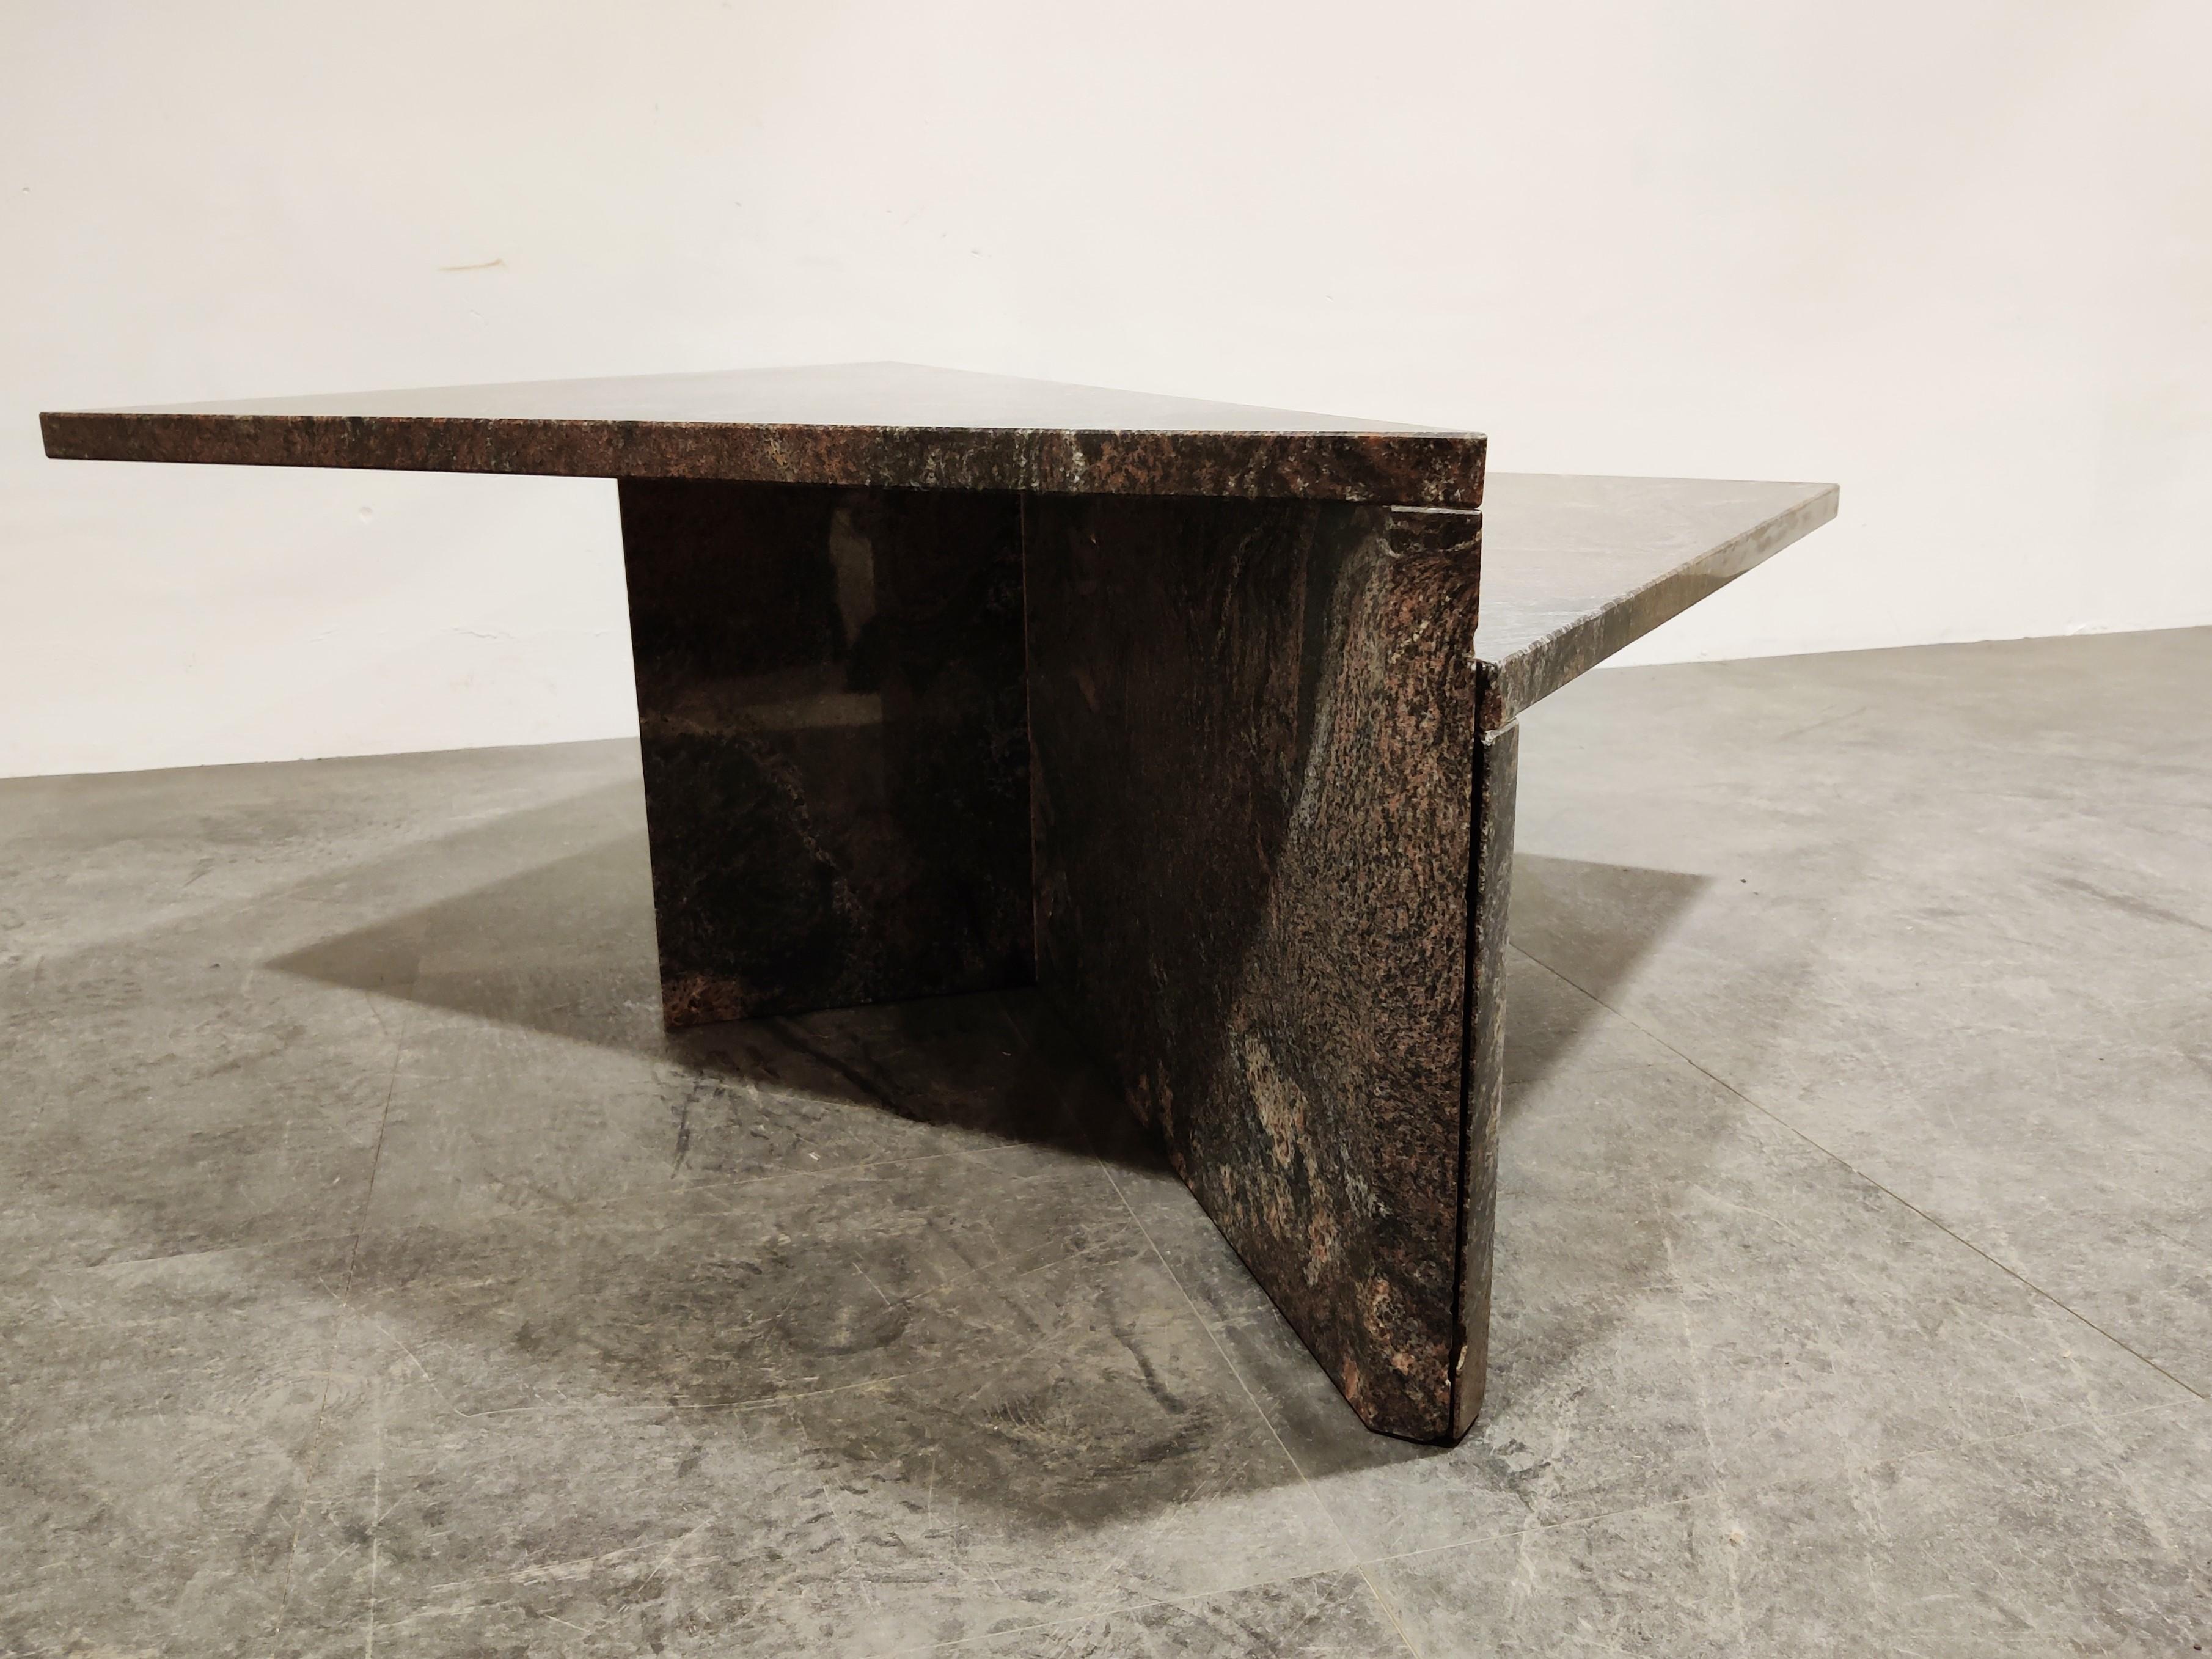 Pair of 1970s granite stone triangular coffee tables by Up&Up.

The table can be a two level coffee table or be used as two separate tables.

Beautiful colour and pattern.

Condition, the table has got some chips which as not very disturbing.